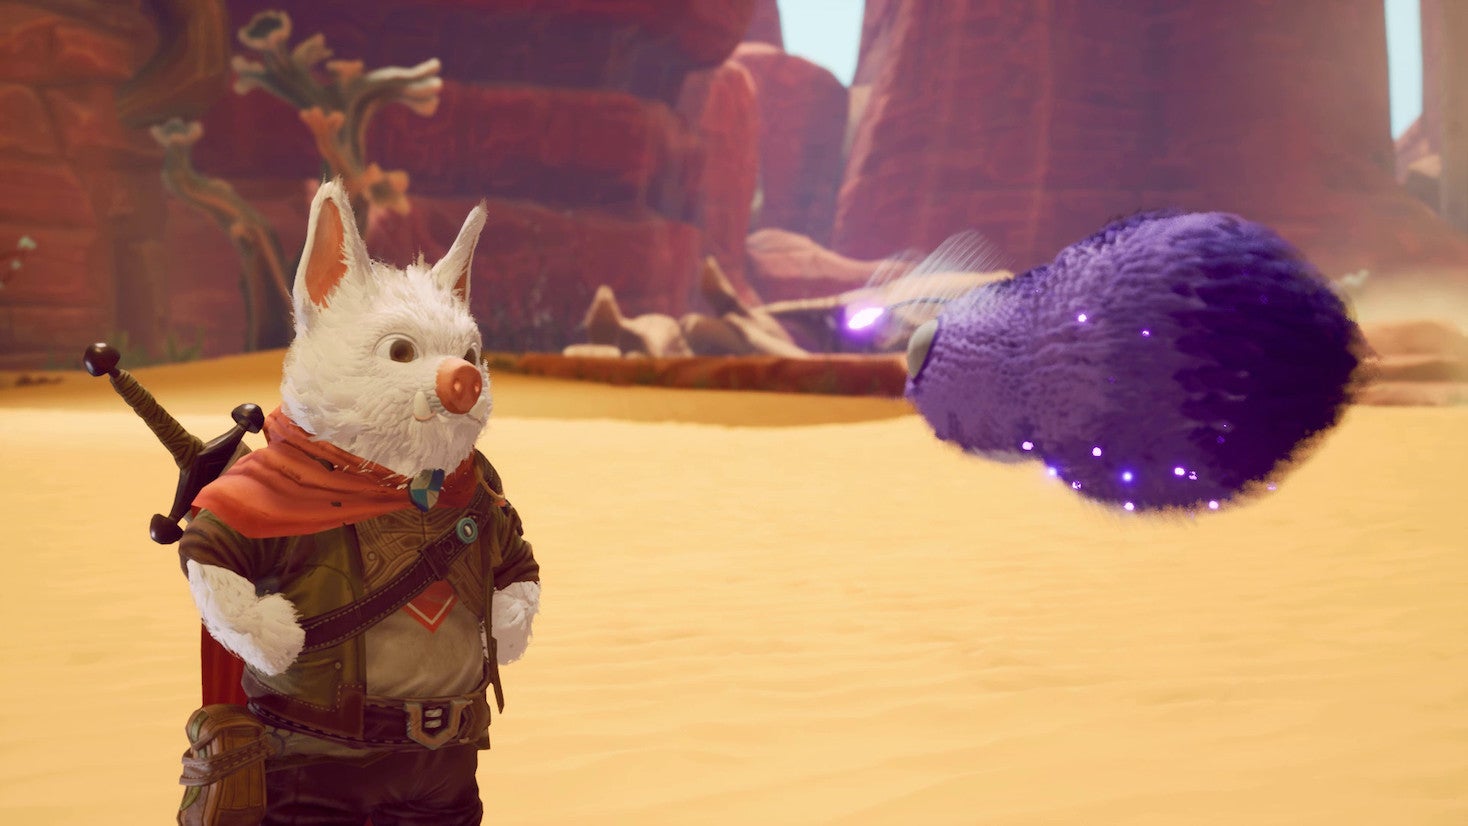 earthlock 2 trailer image of a bunny creature staring at a fluffy purple creature flying through the air